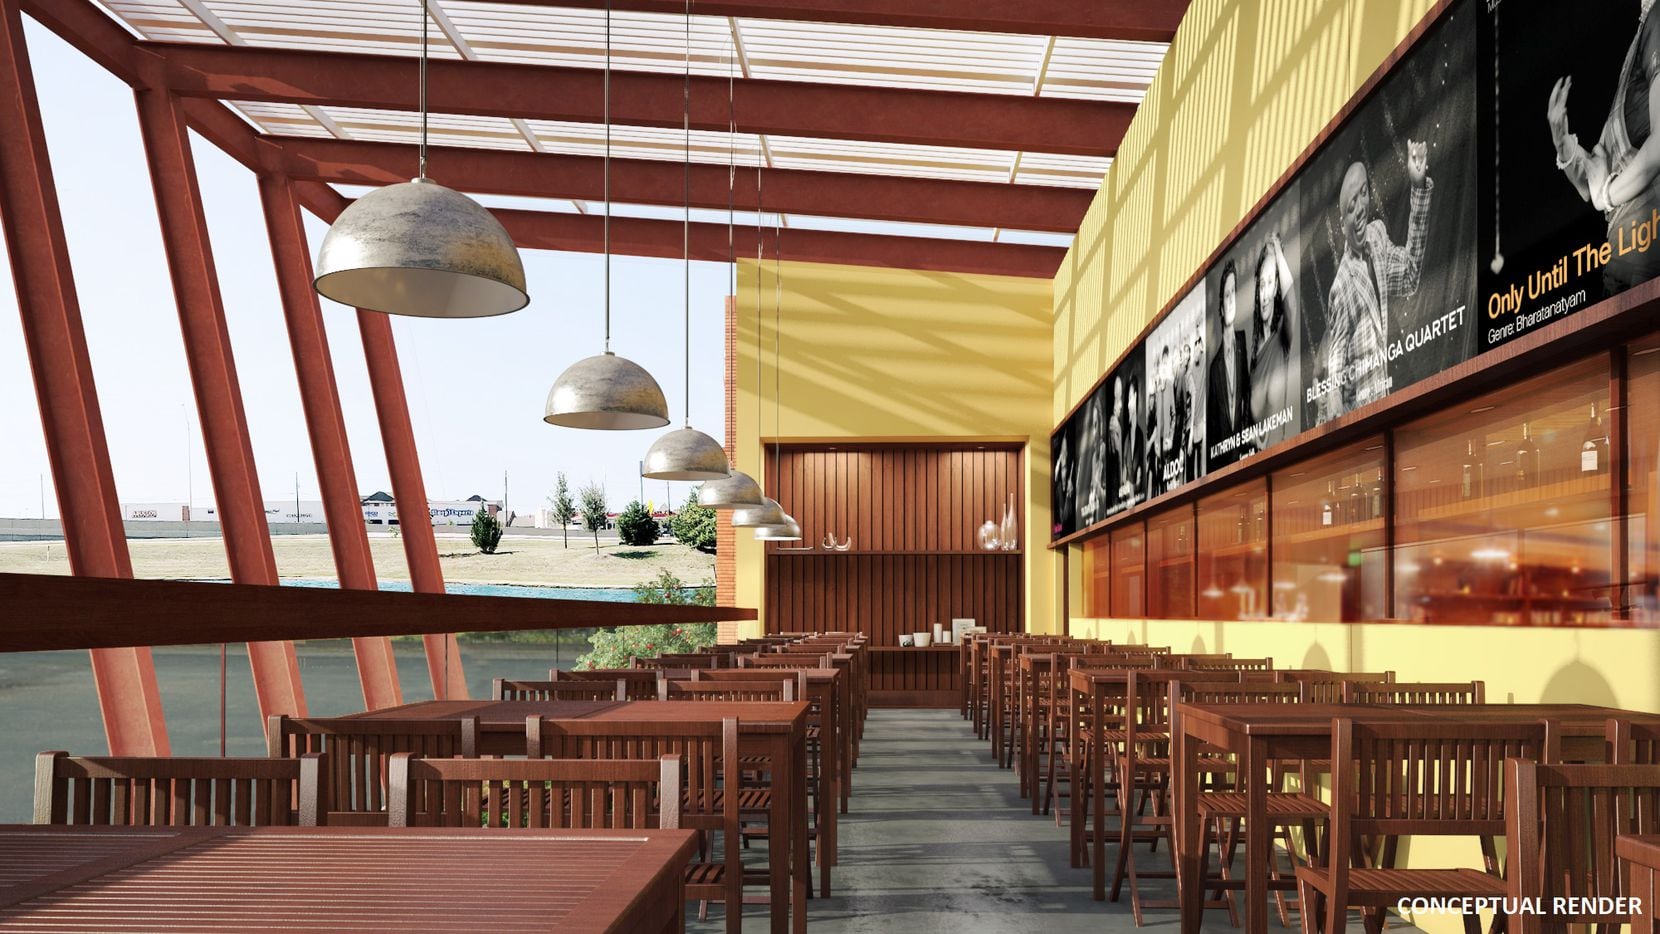 Windmills is an upcoming microbrewery and restaurant in the Grandscape development